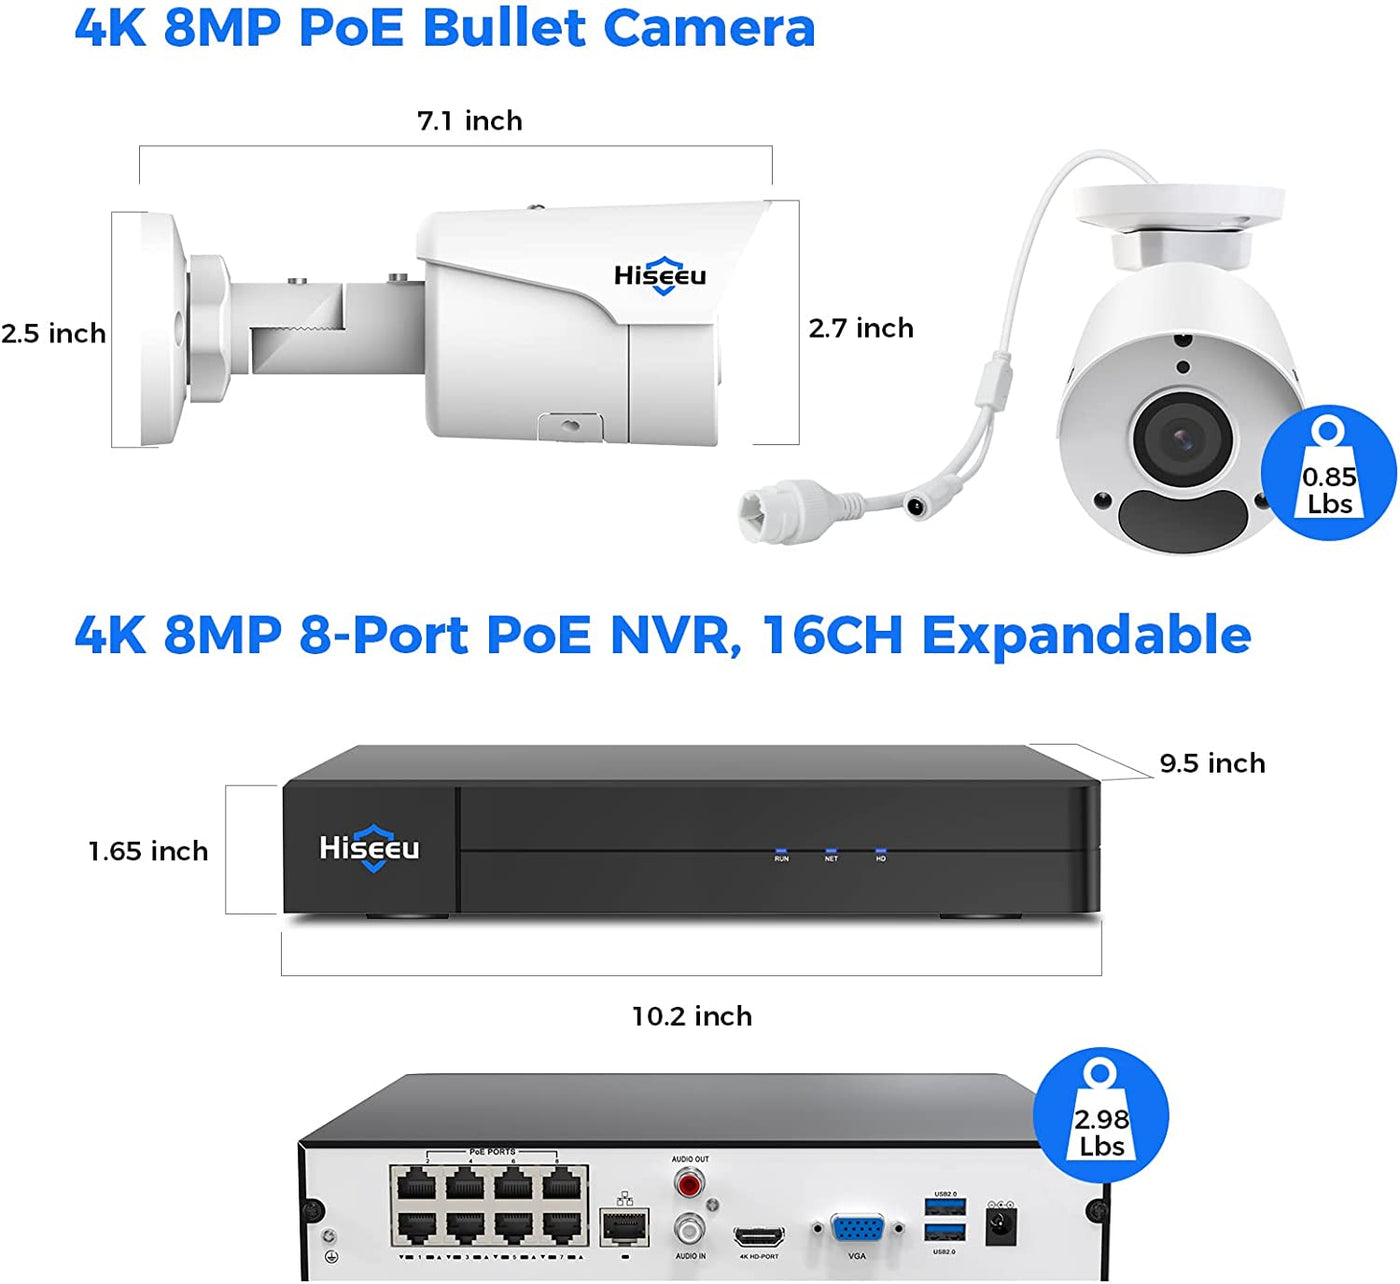 [121°Wide View Angle] 4K Camera PoE Camera,8MP IP Camera Outdoor&Indoor,3840*2160,100ft Night Vision,1-Way Audio, WDR, Human/Vehicle Detect, IP67 Waterproof,Work w/PoE NVR Home Surveillance Kit